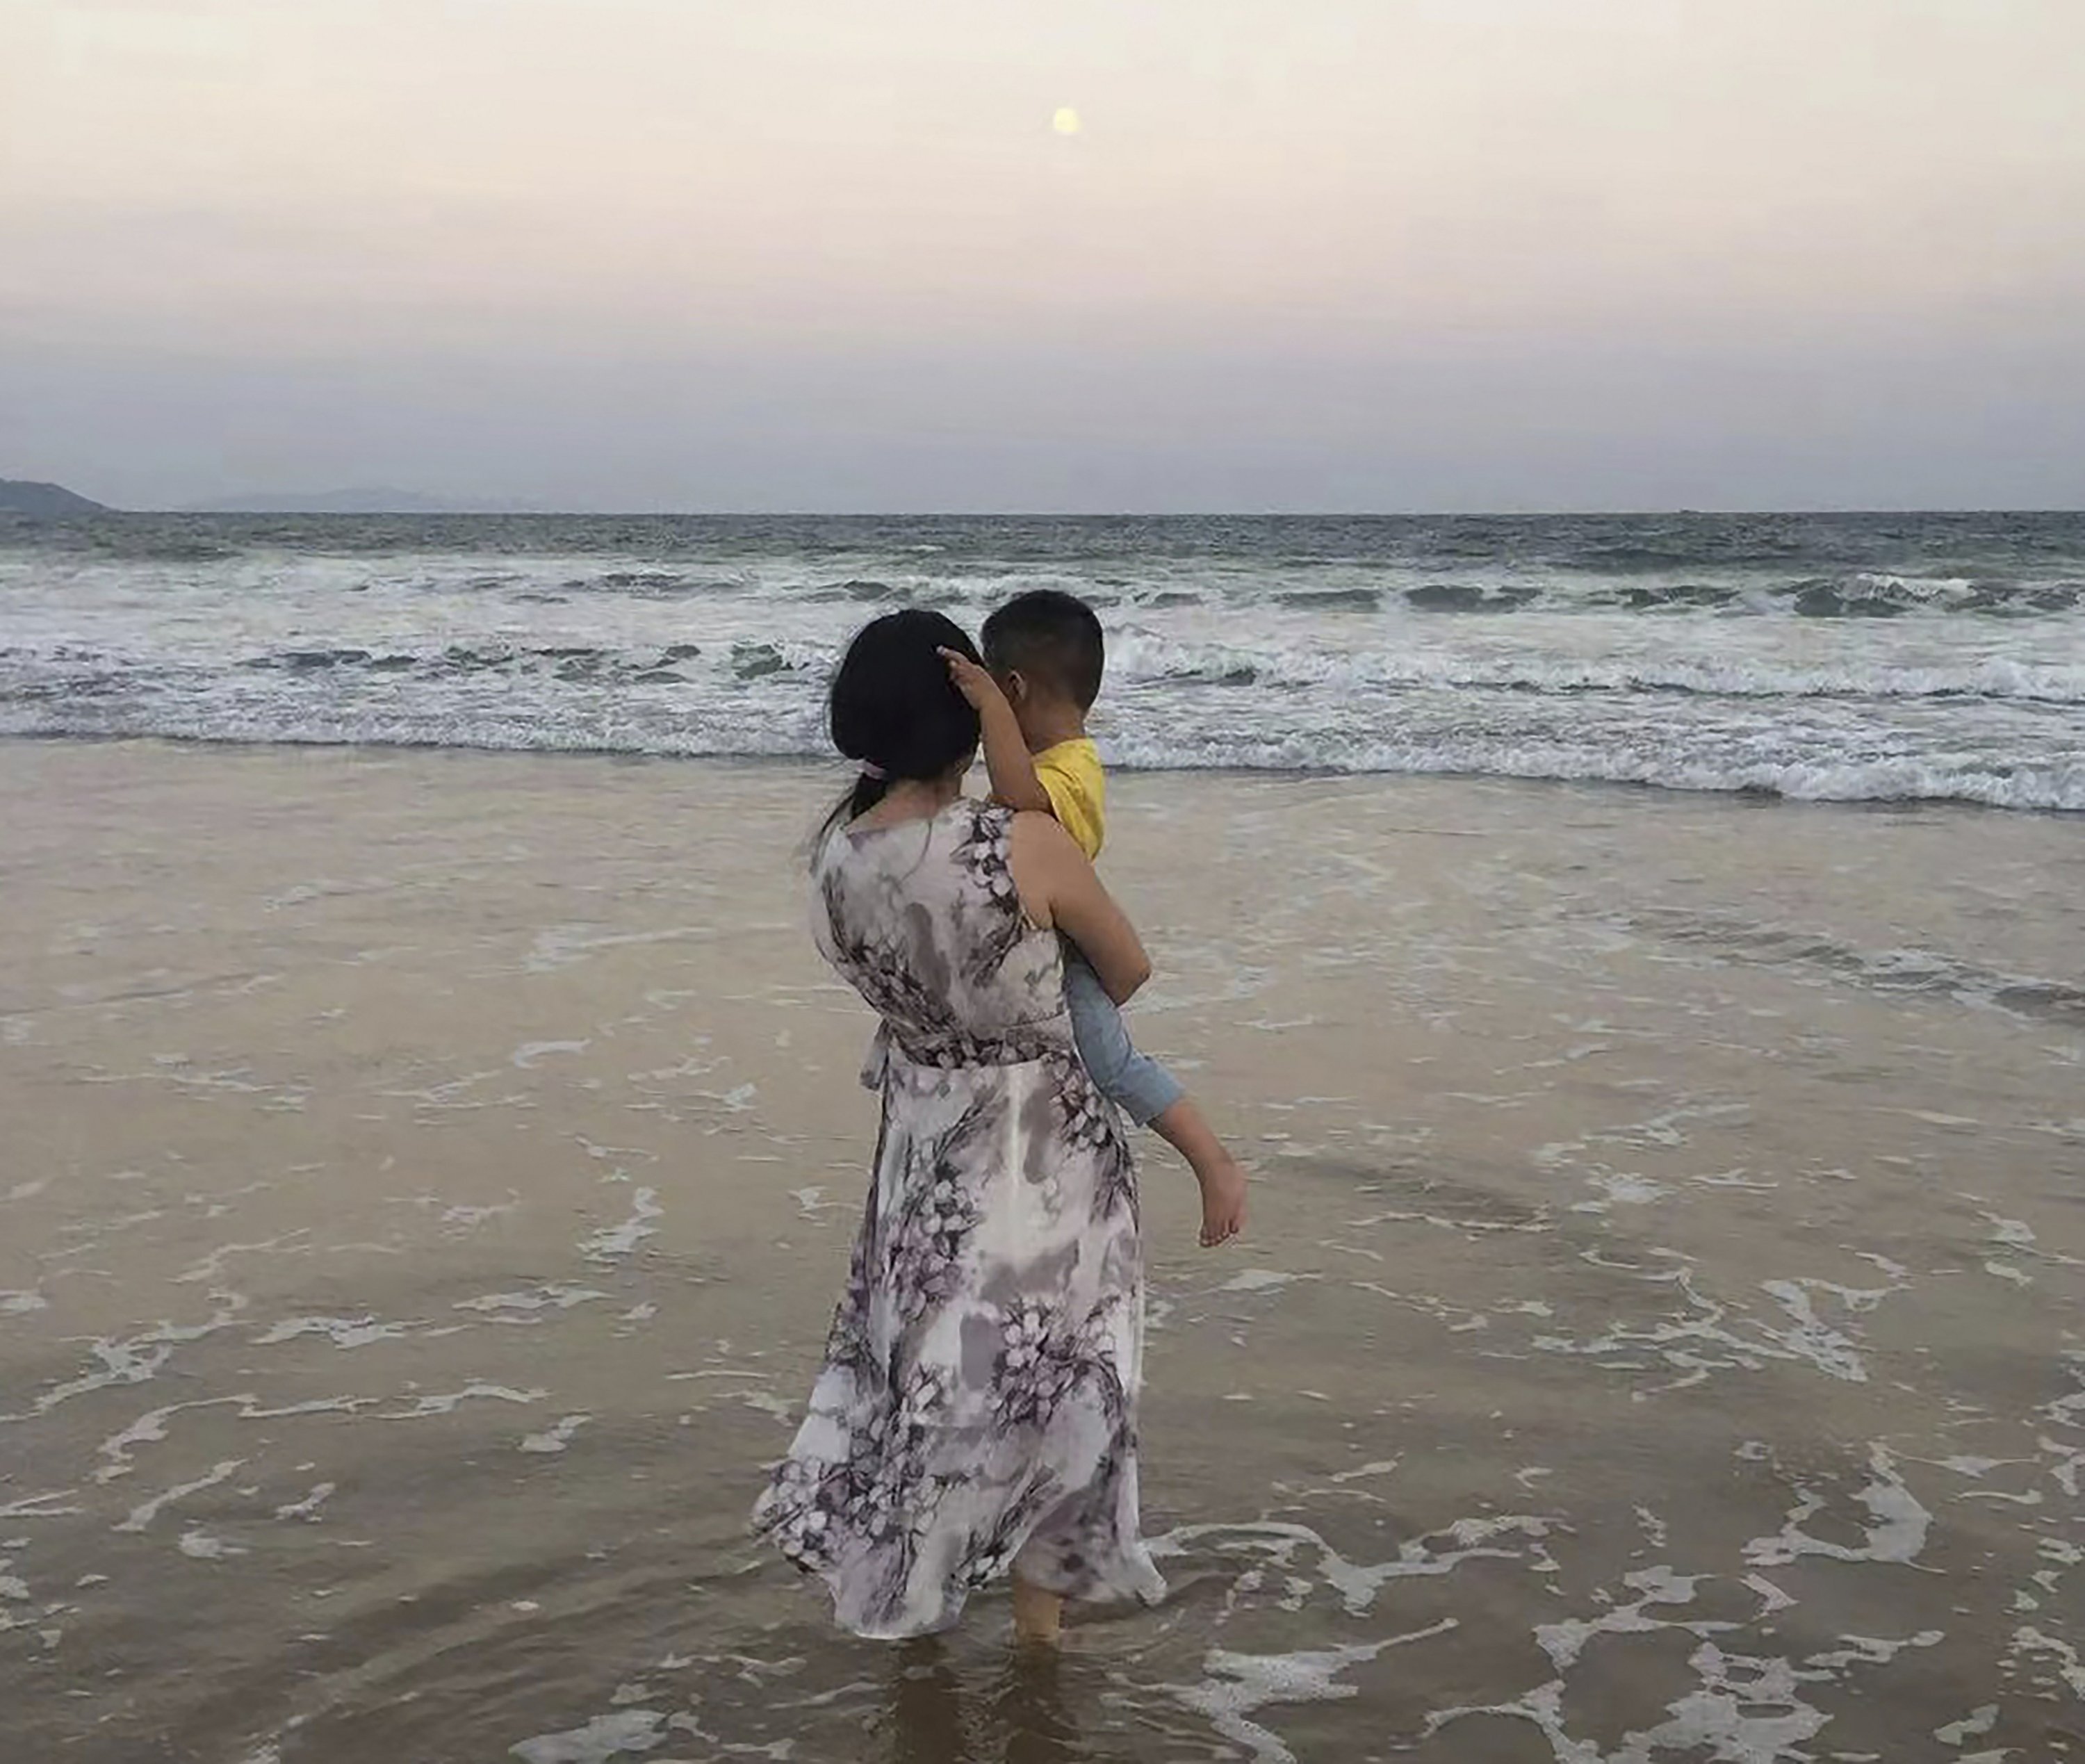 Benefits Denied, Chinese Single Mothers Press for Change